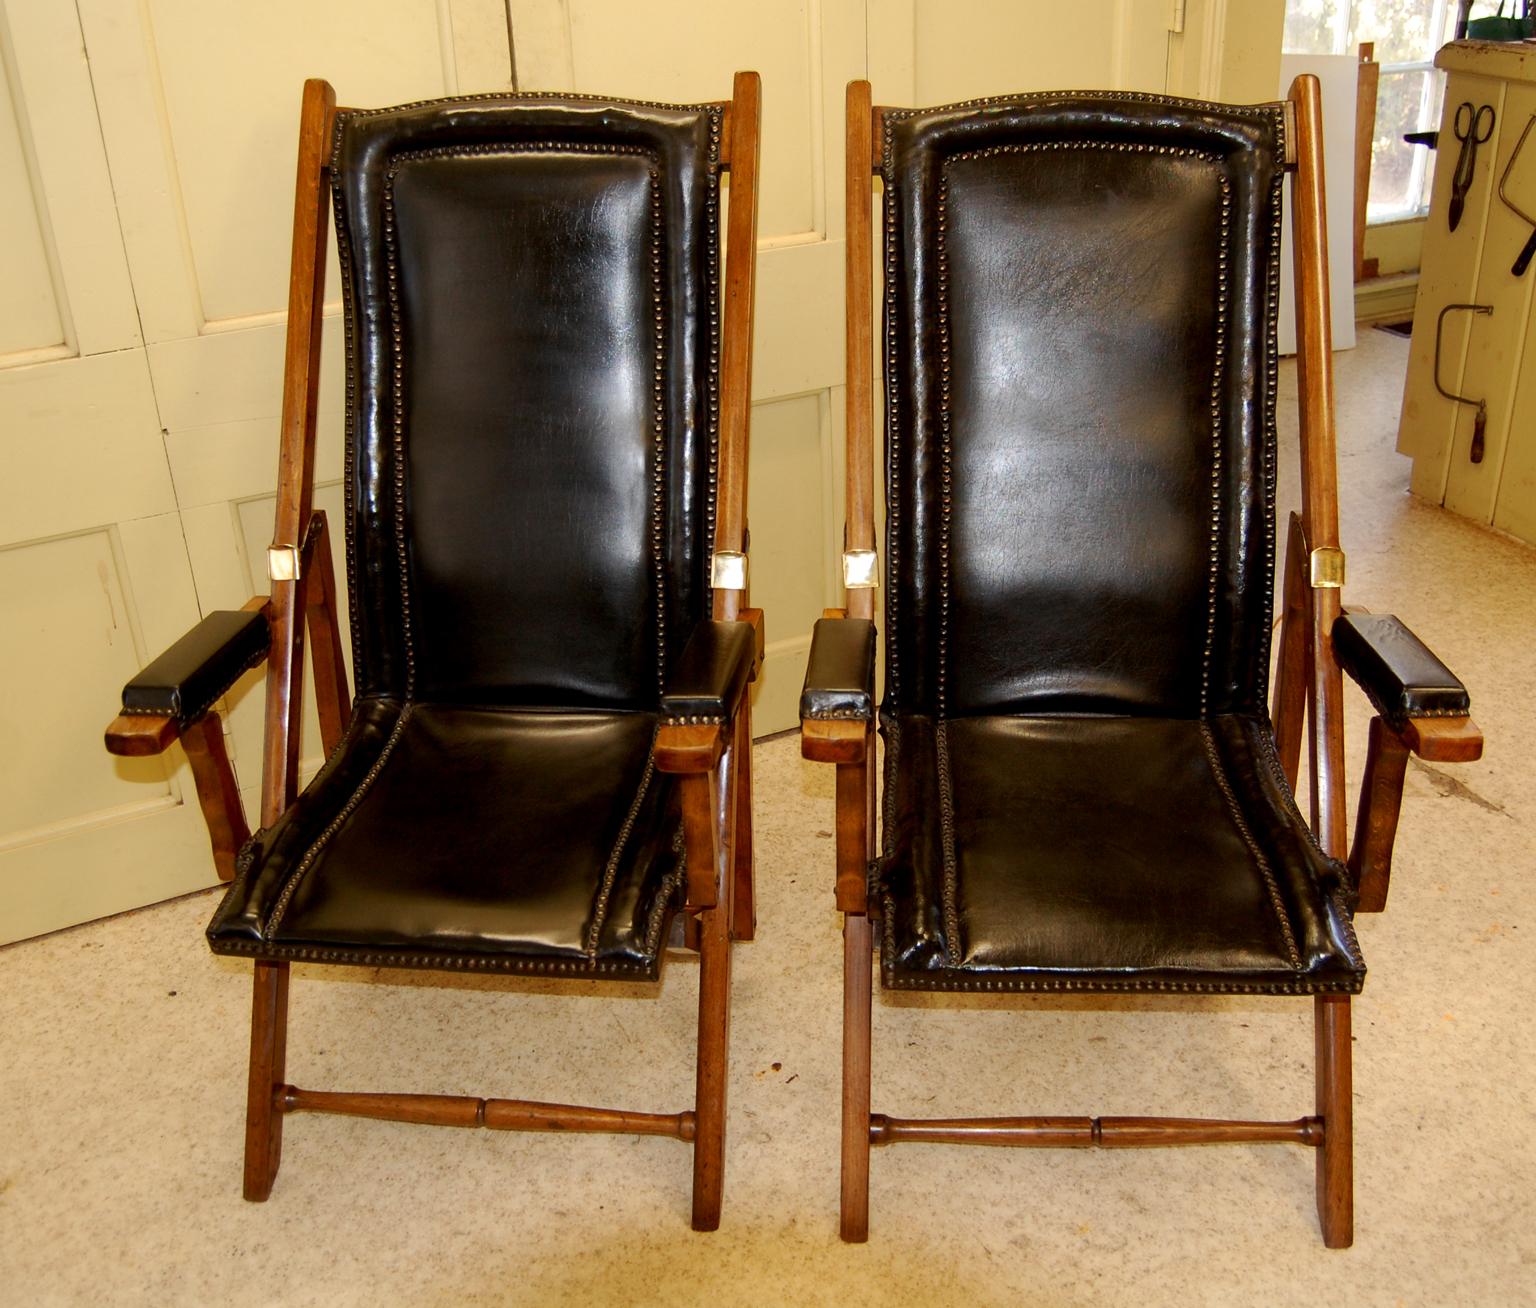 Cowhide English Early 20th Century Pair Black Leather Folding Campaign or Deck Chairs 